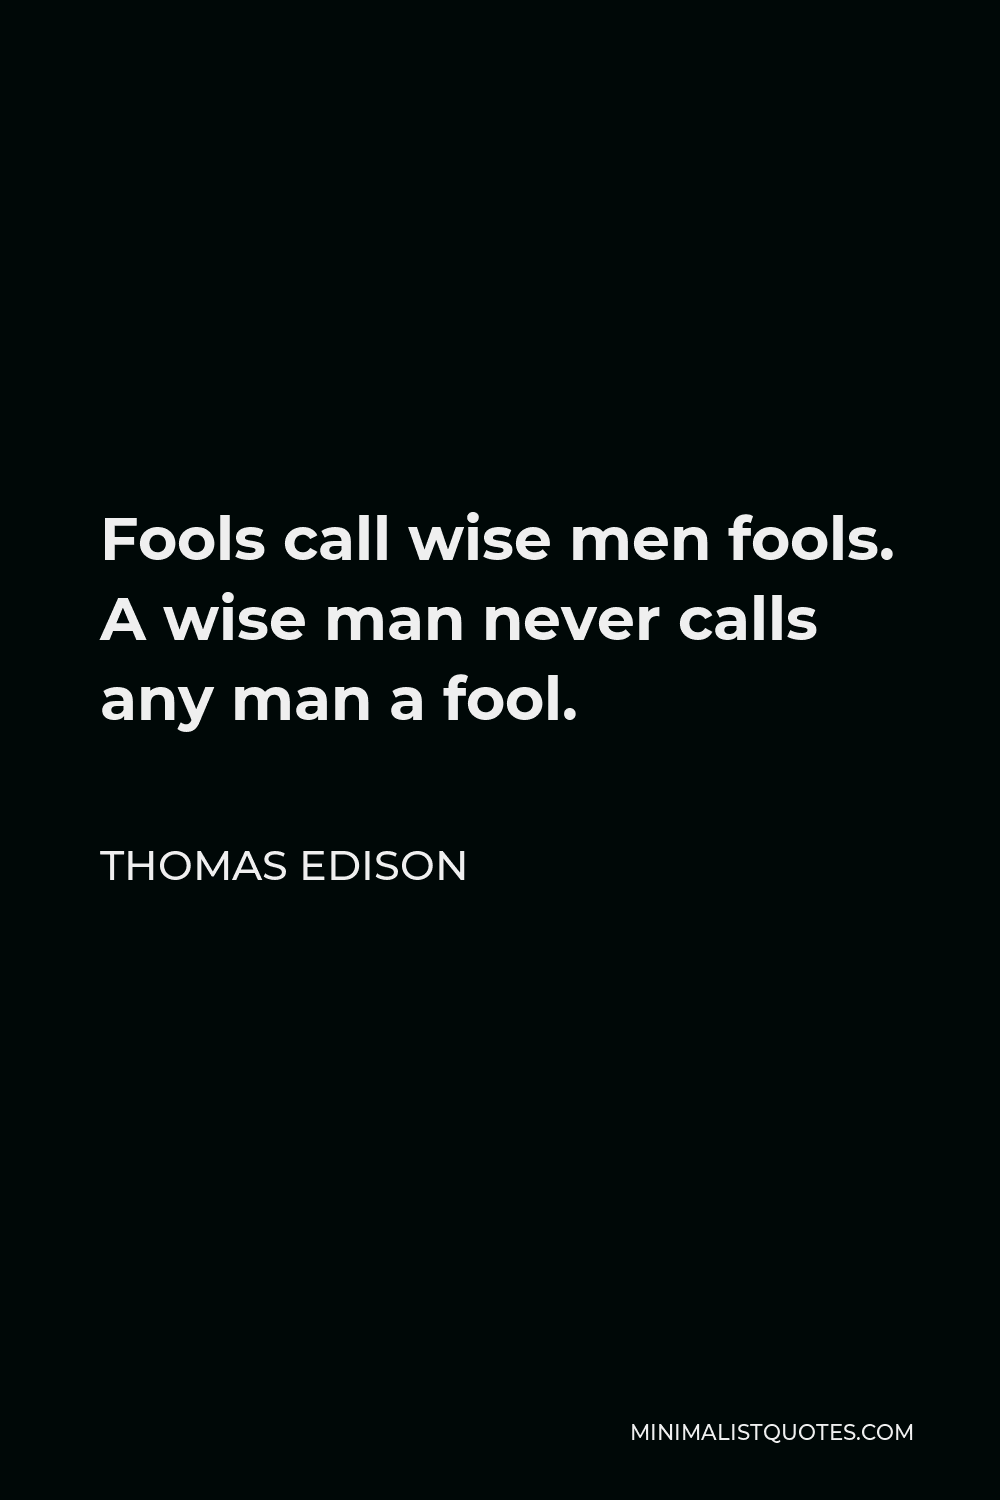 Thomas Edison Quote - Fools call wise men fools. A wise man never calls any man a fool.